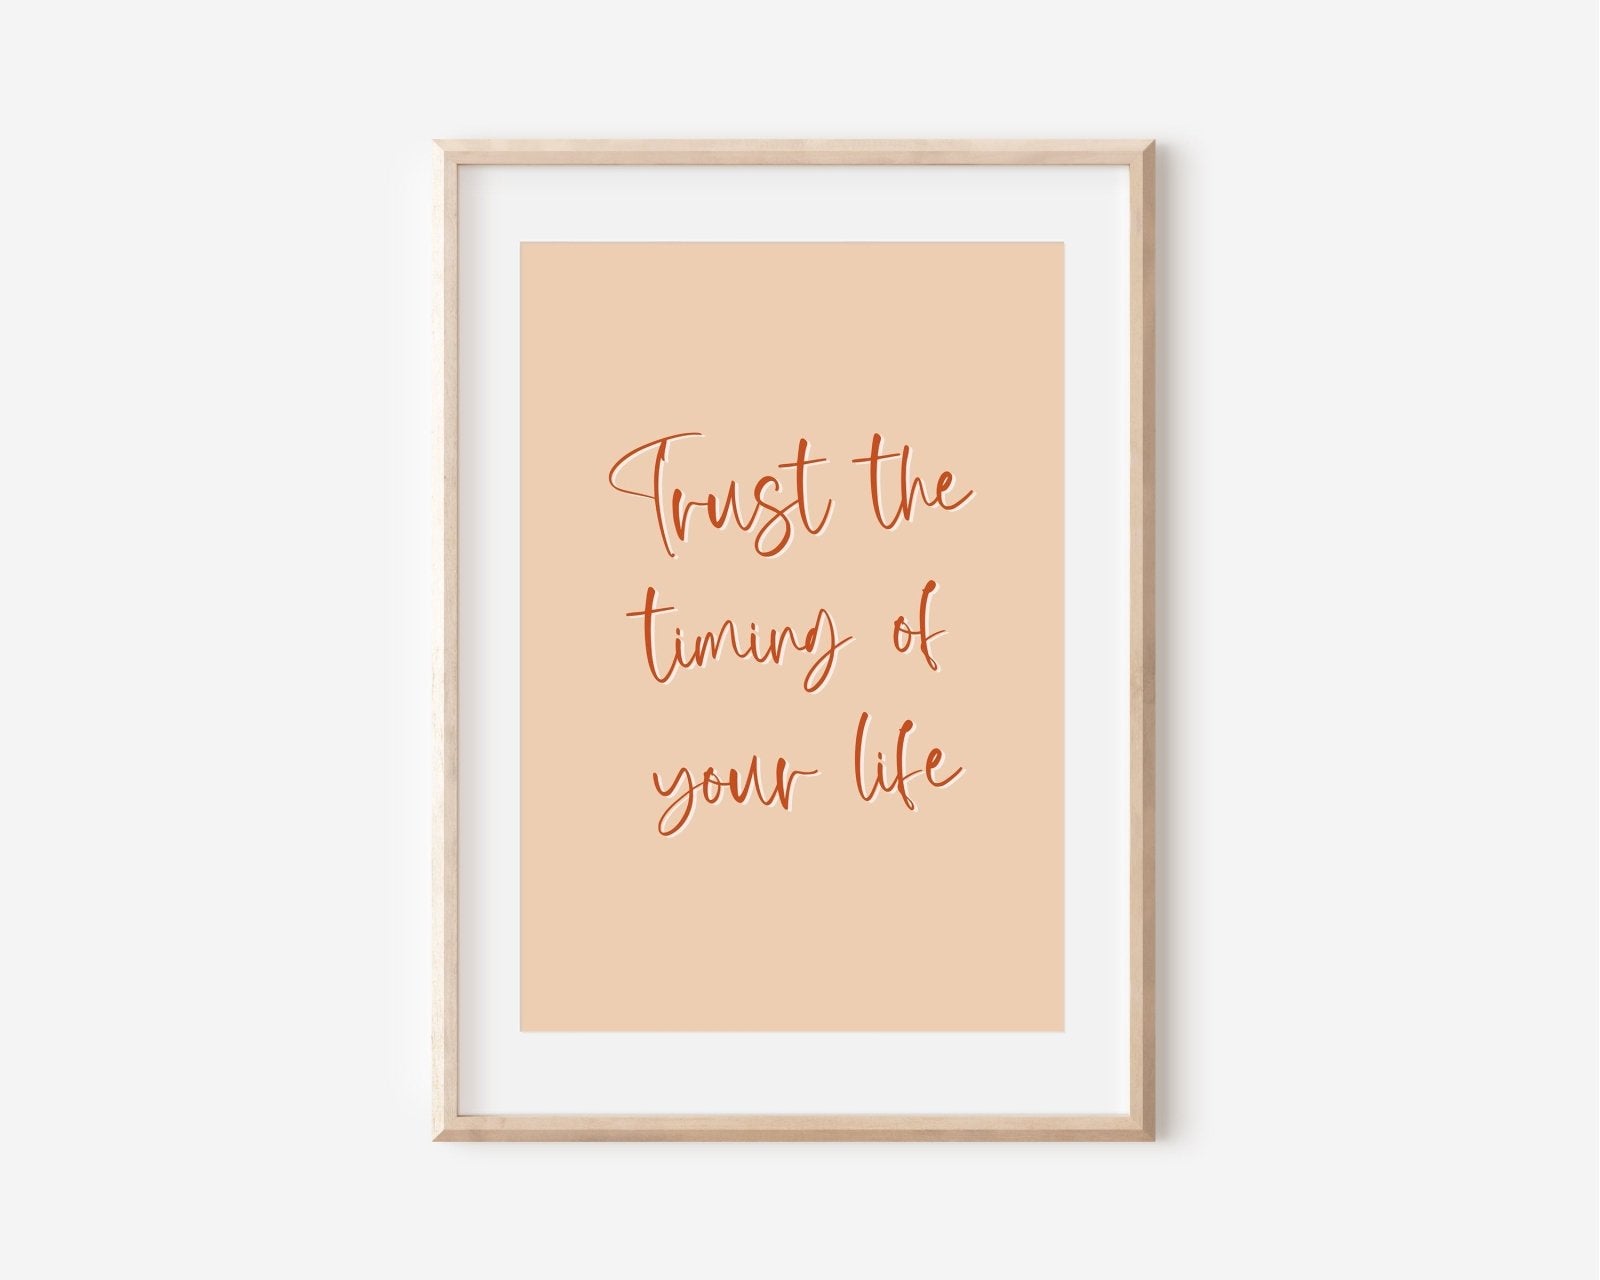 Trust the timing of your life Poster, Zitate Poster, Poster Sprüche, Typografie, Yoga Poster, Print Motivation, Poster Achtsamkeit, Din A4 - HappyLuz Shop